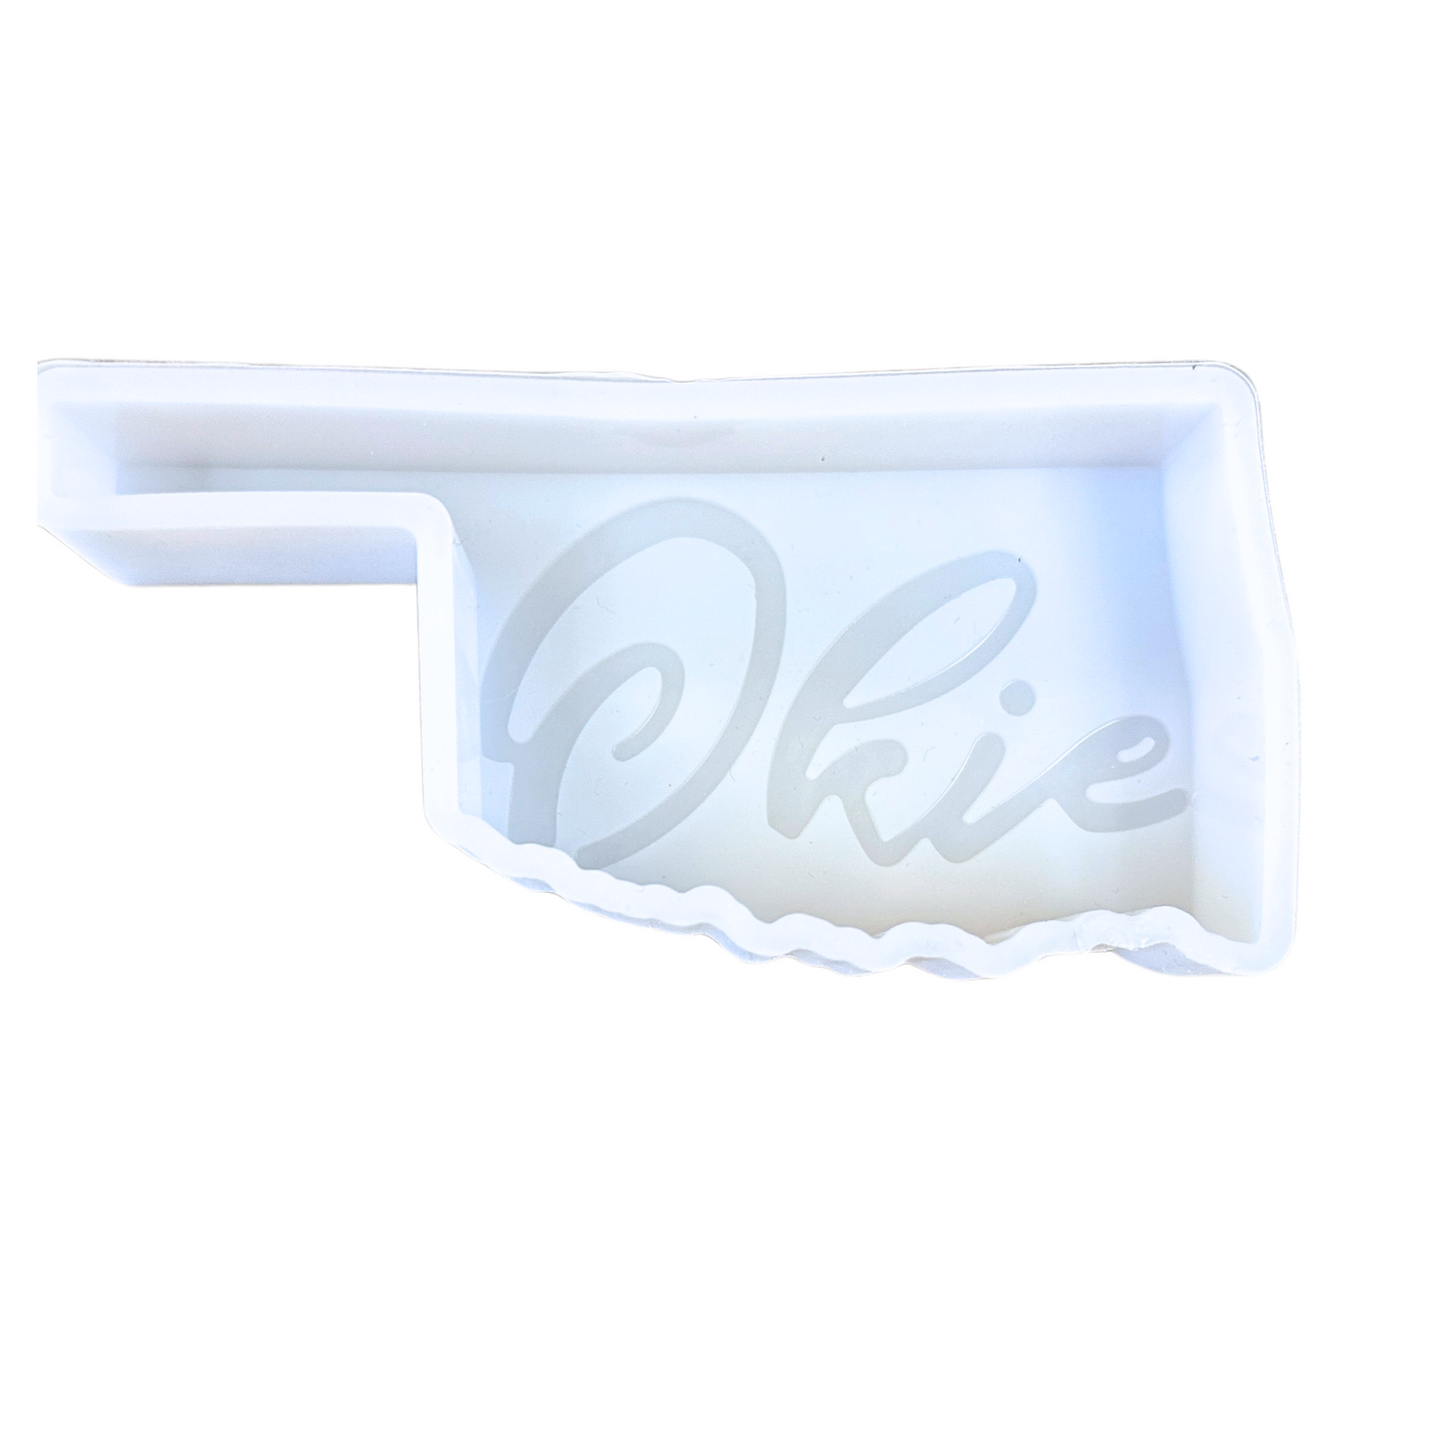 Okie State of Oklahoma Shaped Silicone Mold